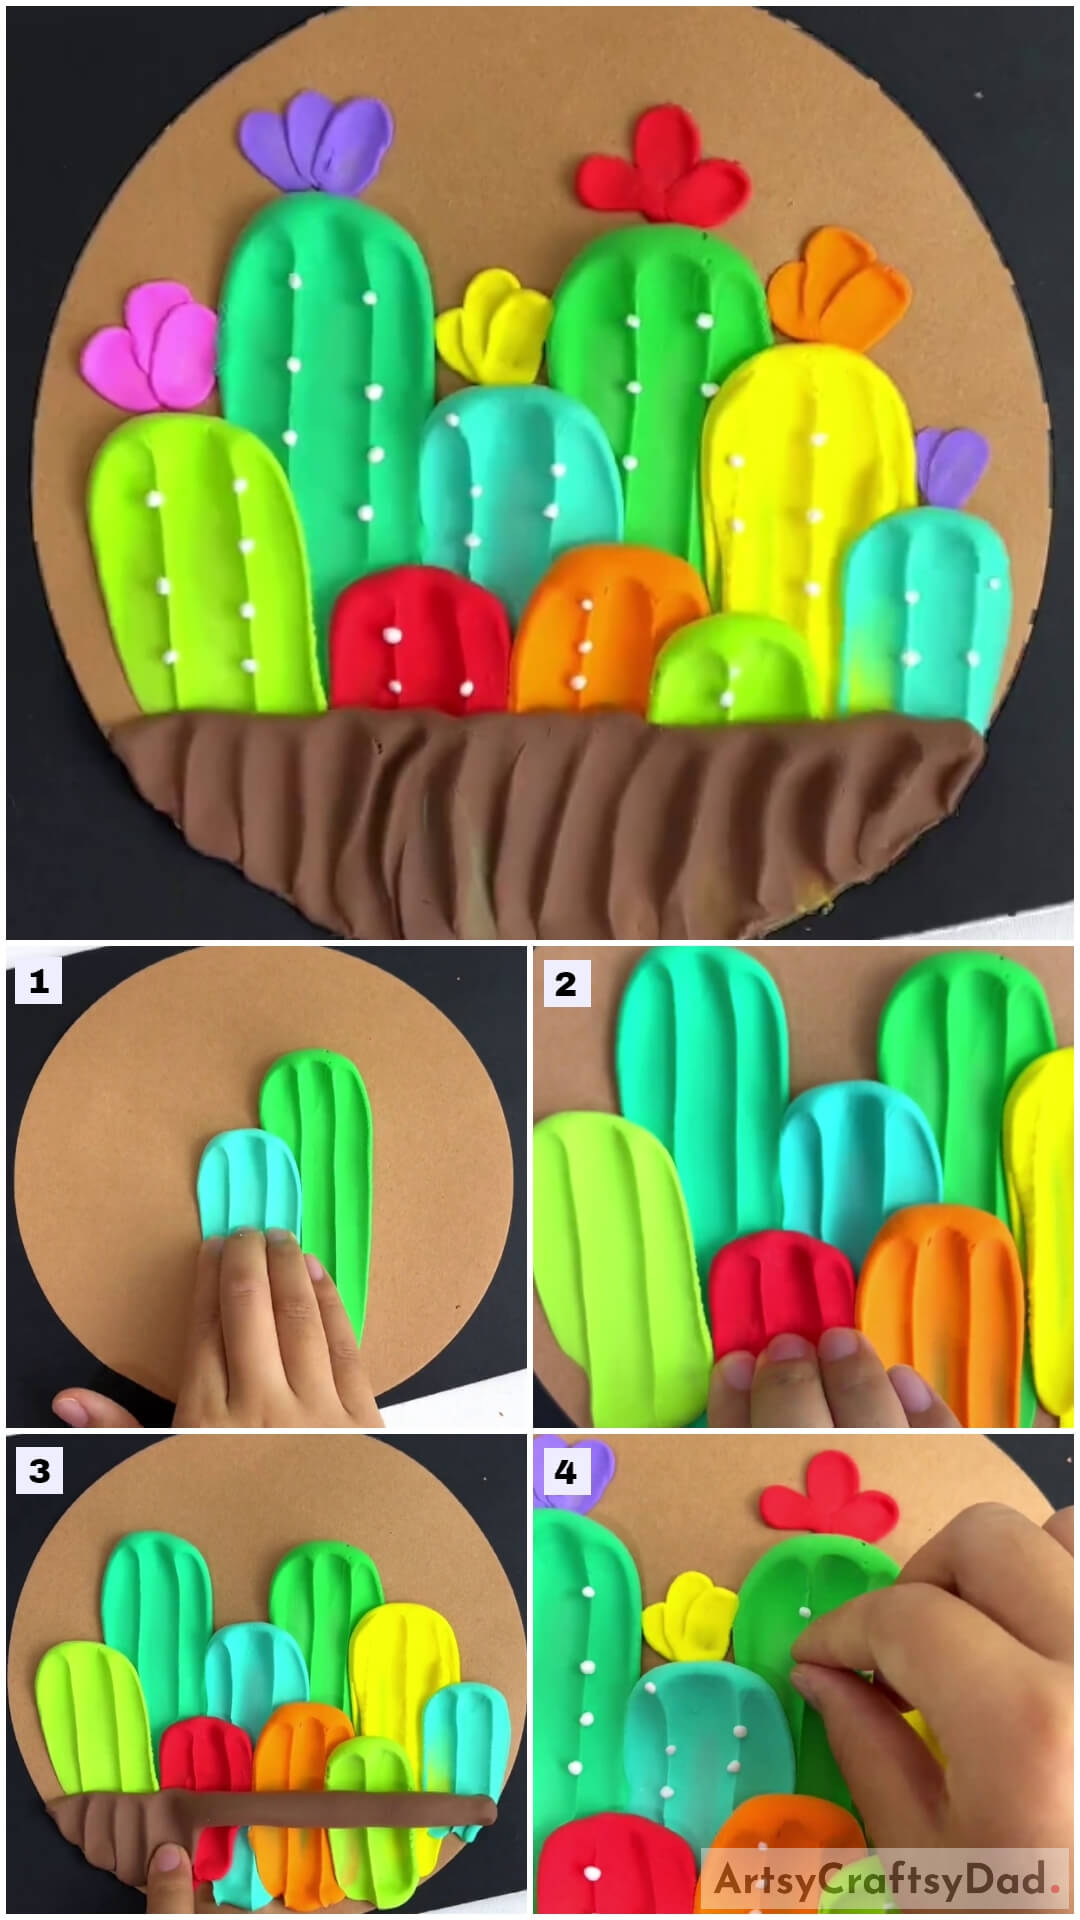 Awesome Colorful Clay Cactuses Craft Tutorial For KIds